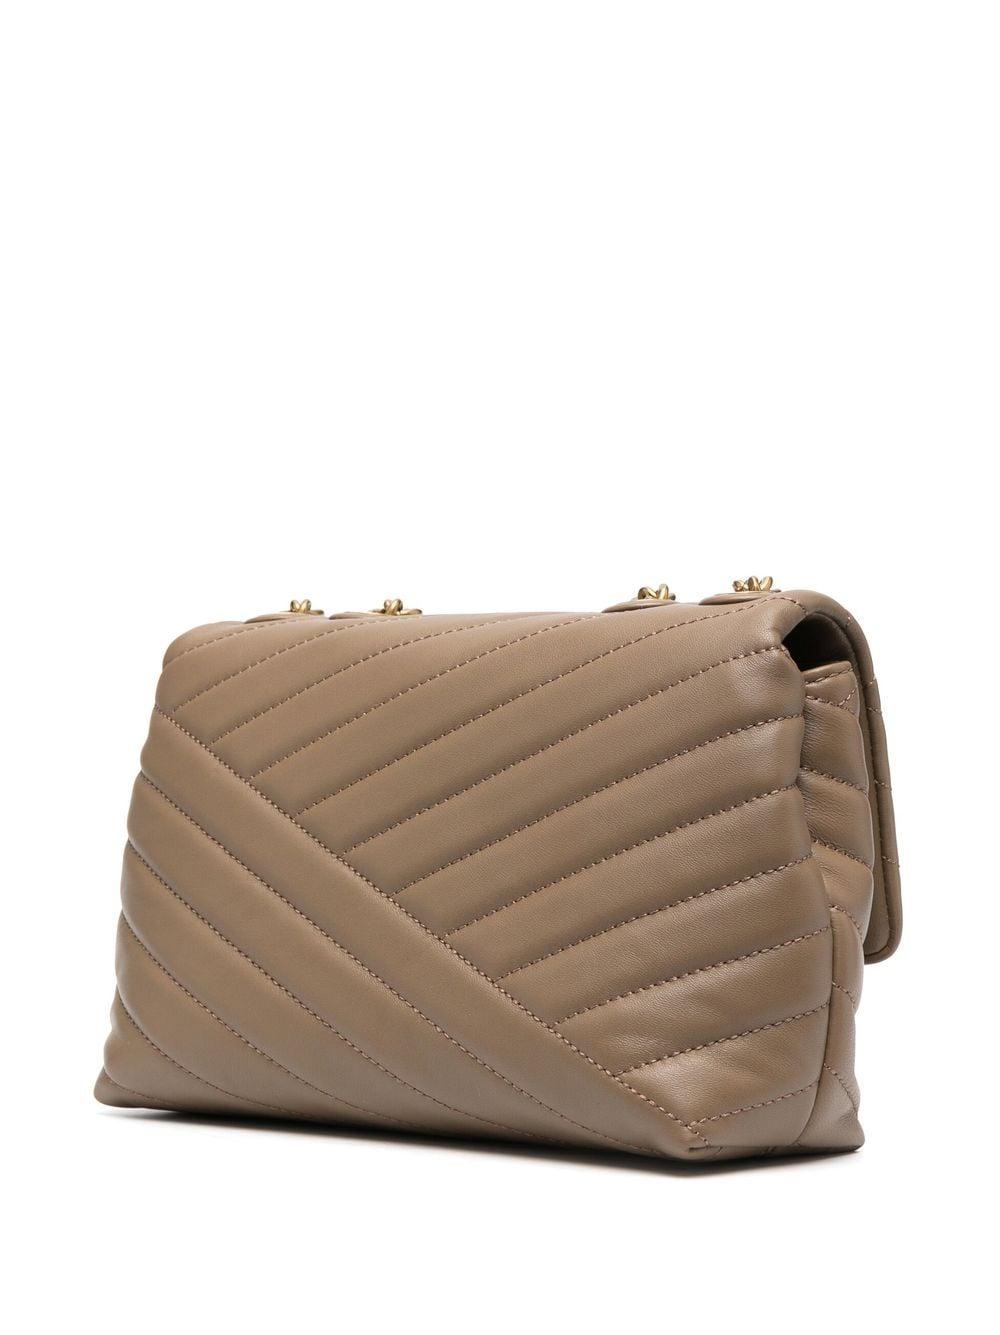 Tory Burch Kira Quilted Crossbody Bag in Brown | Lyst